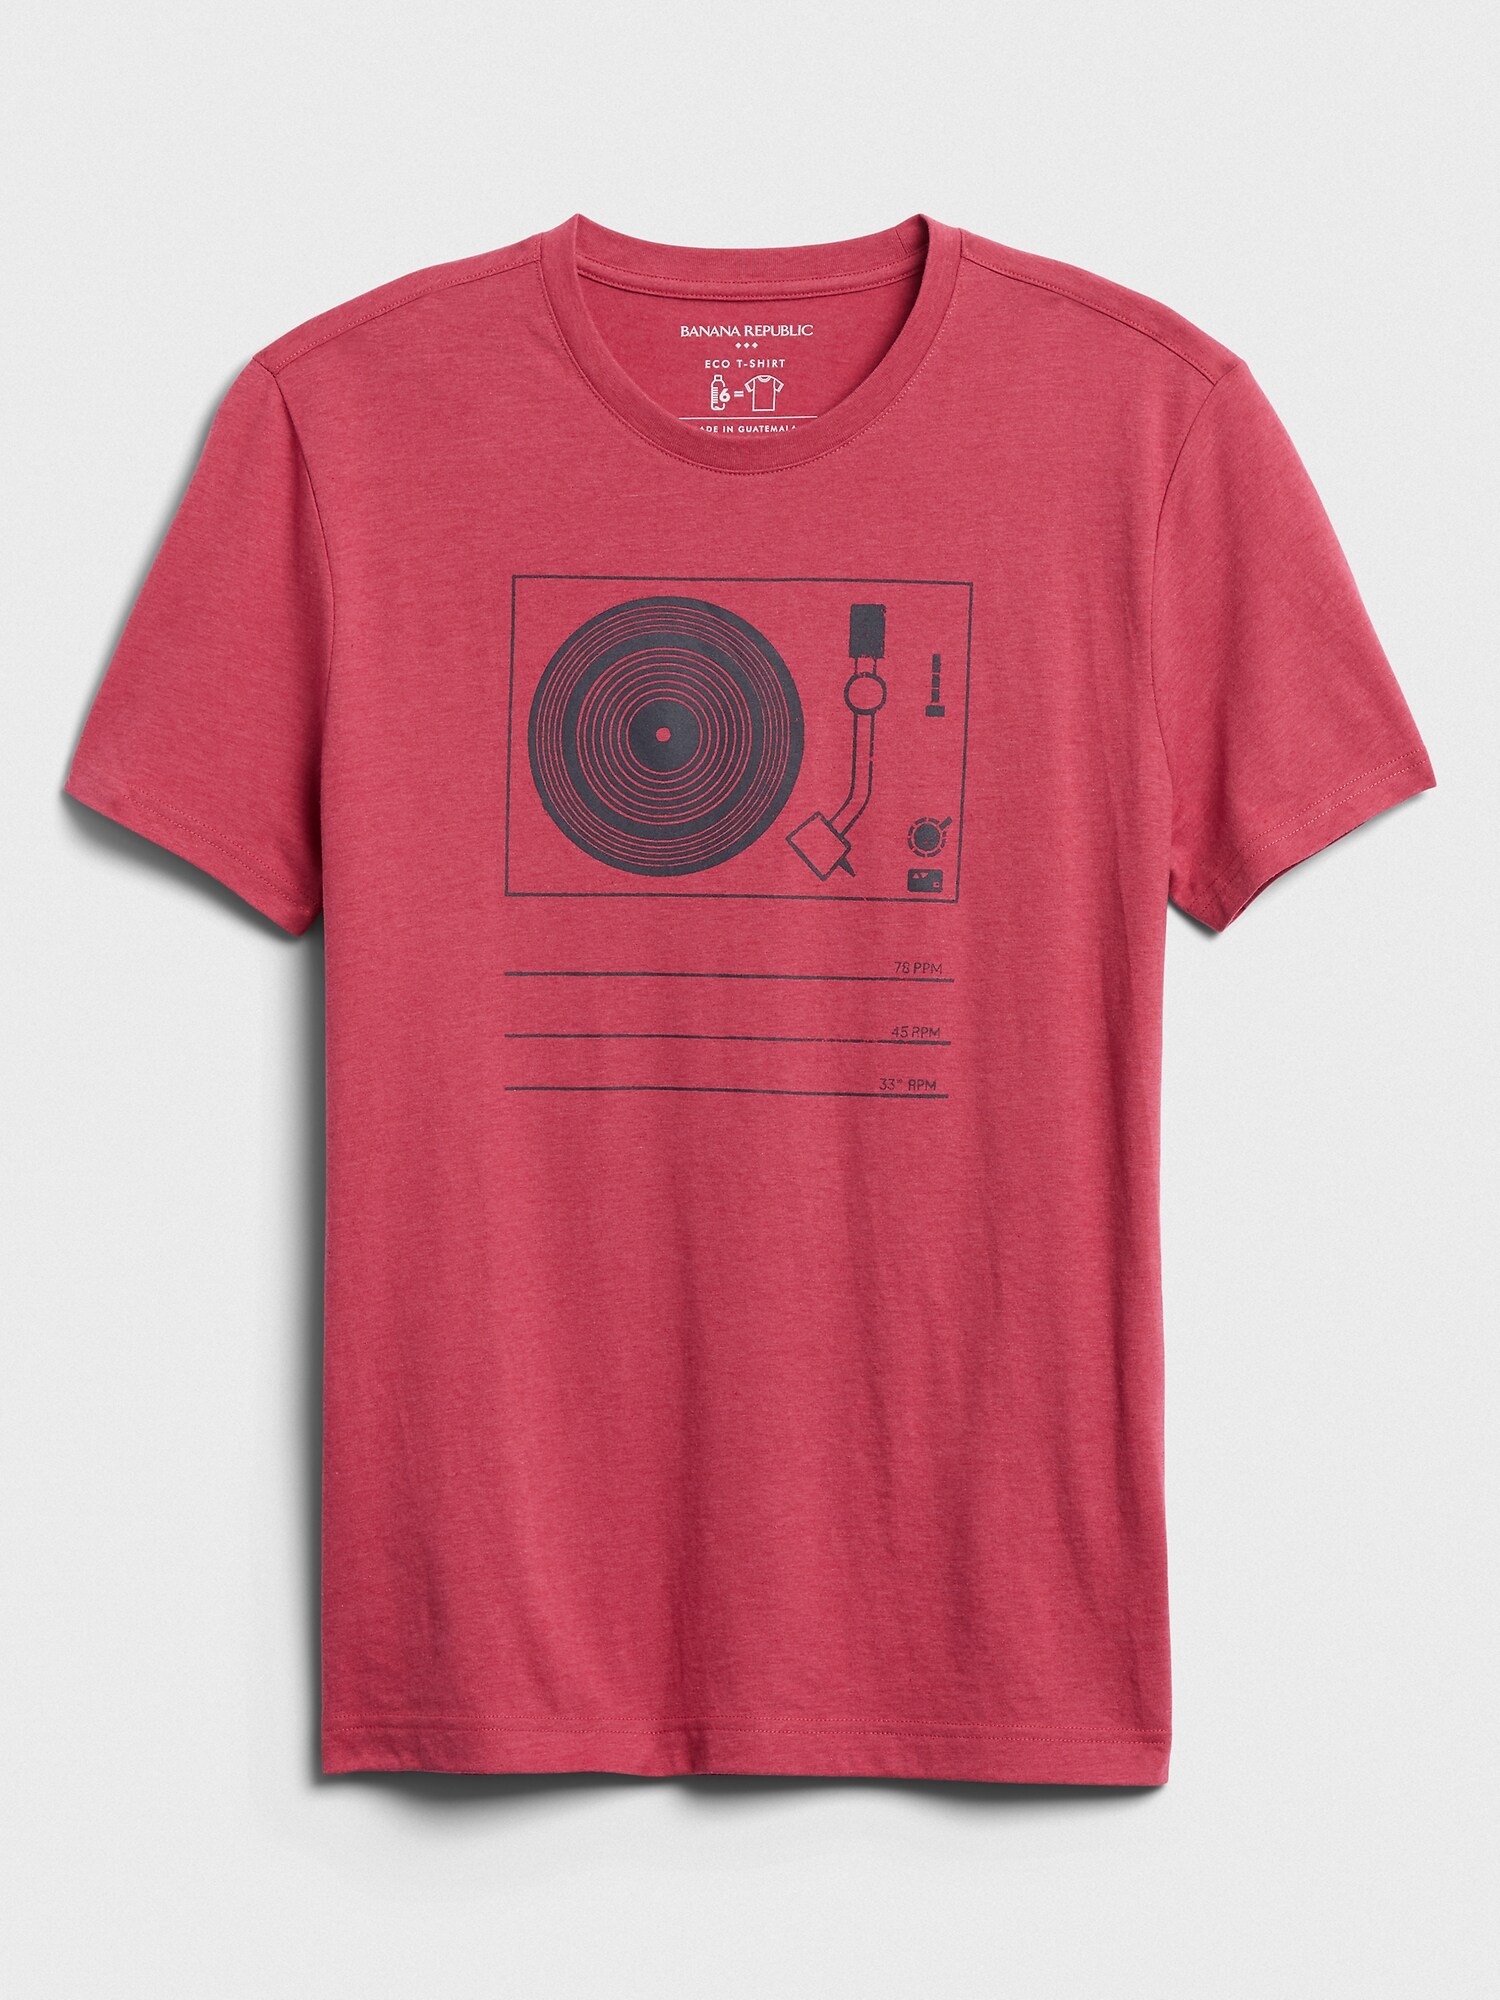 Turntable Graphic T-Shirt